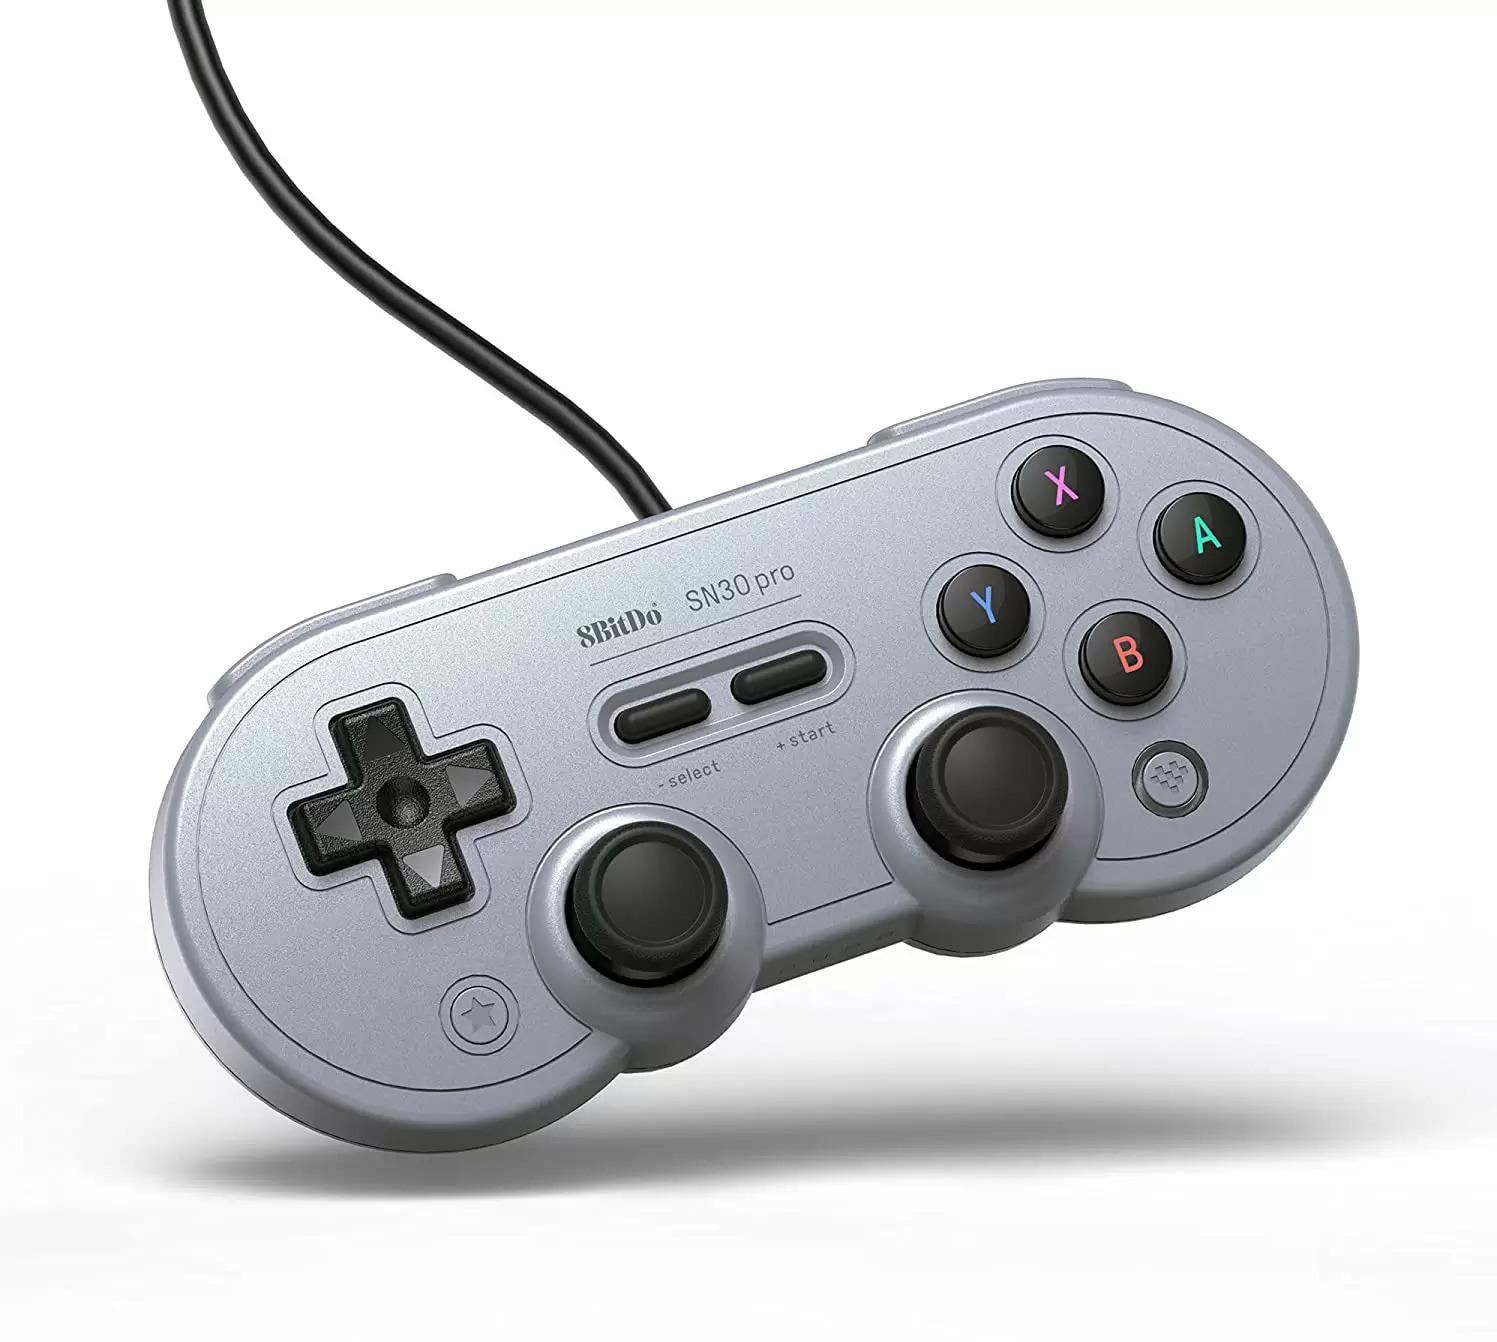 8Bitdo SN30 Pro USB Wired Gamepad for $22.99